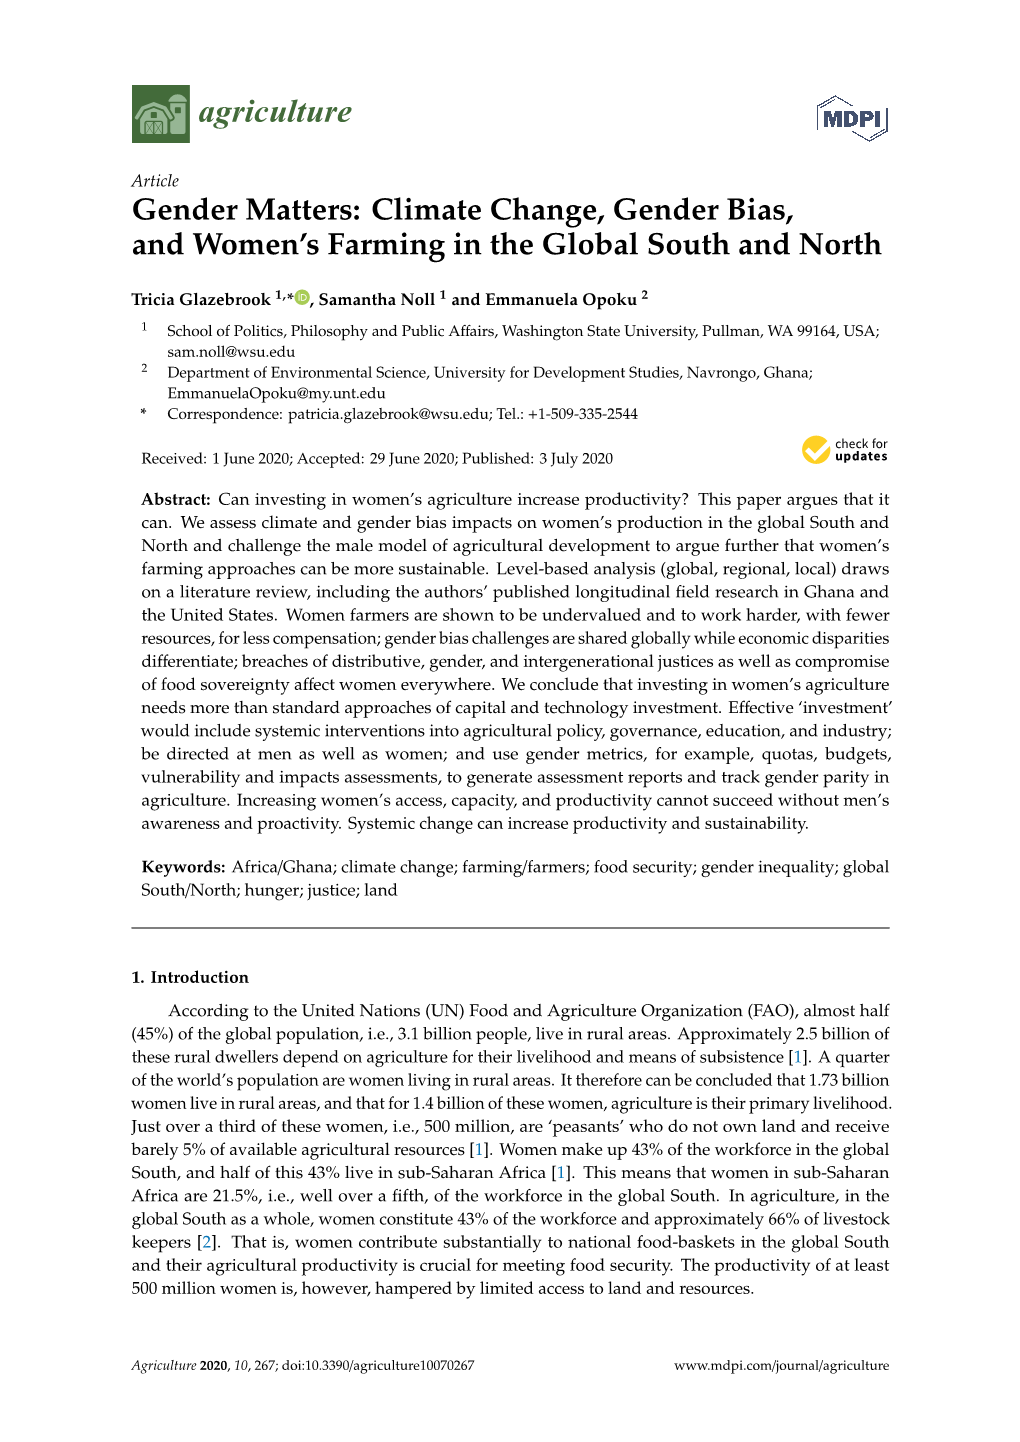 Climate Change, Gender Bias, and Women's Farming in the Global